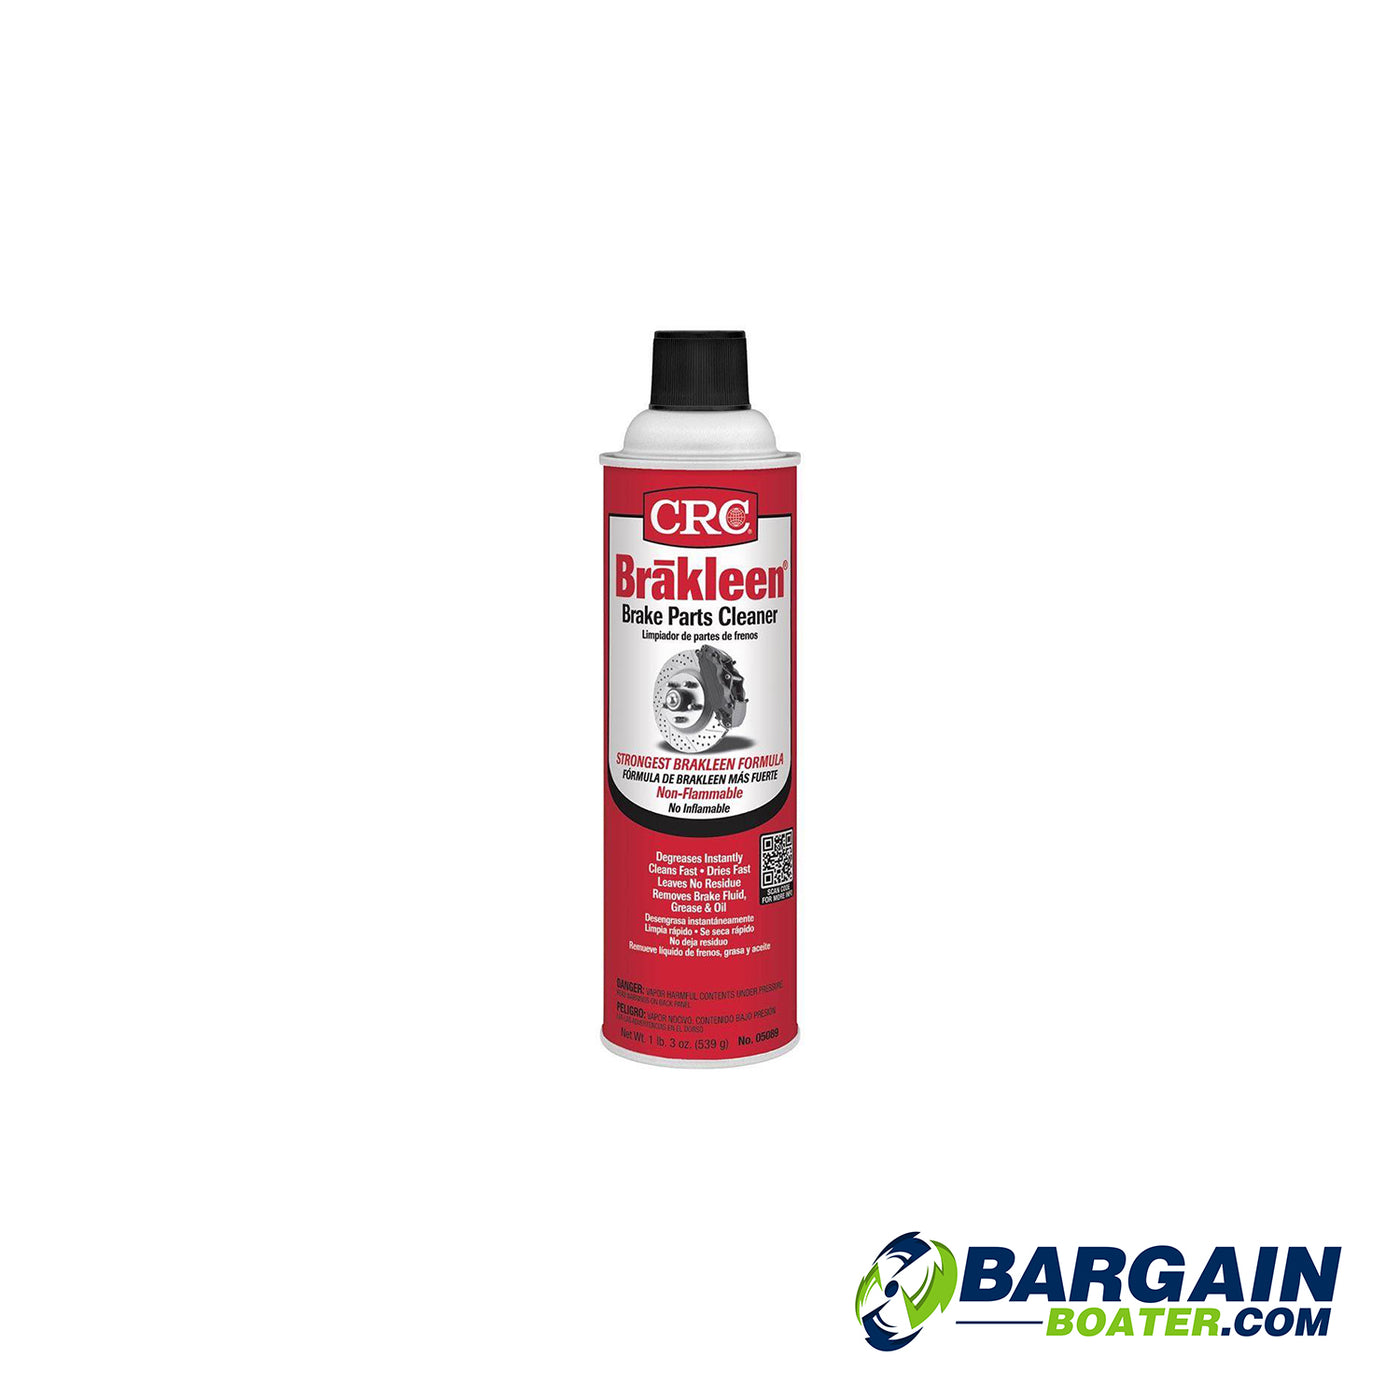 CRC Brakleen Non-Flammable Brake Parts Cleaner